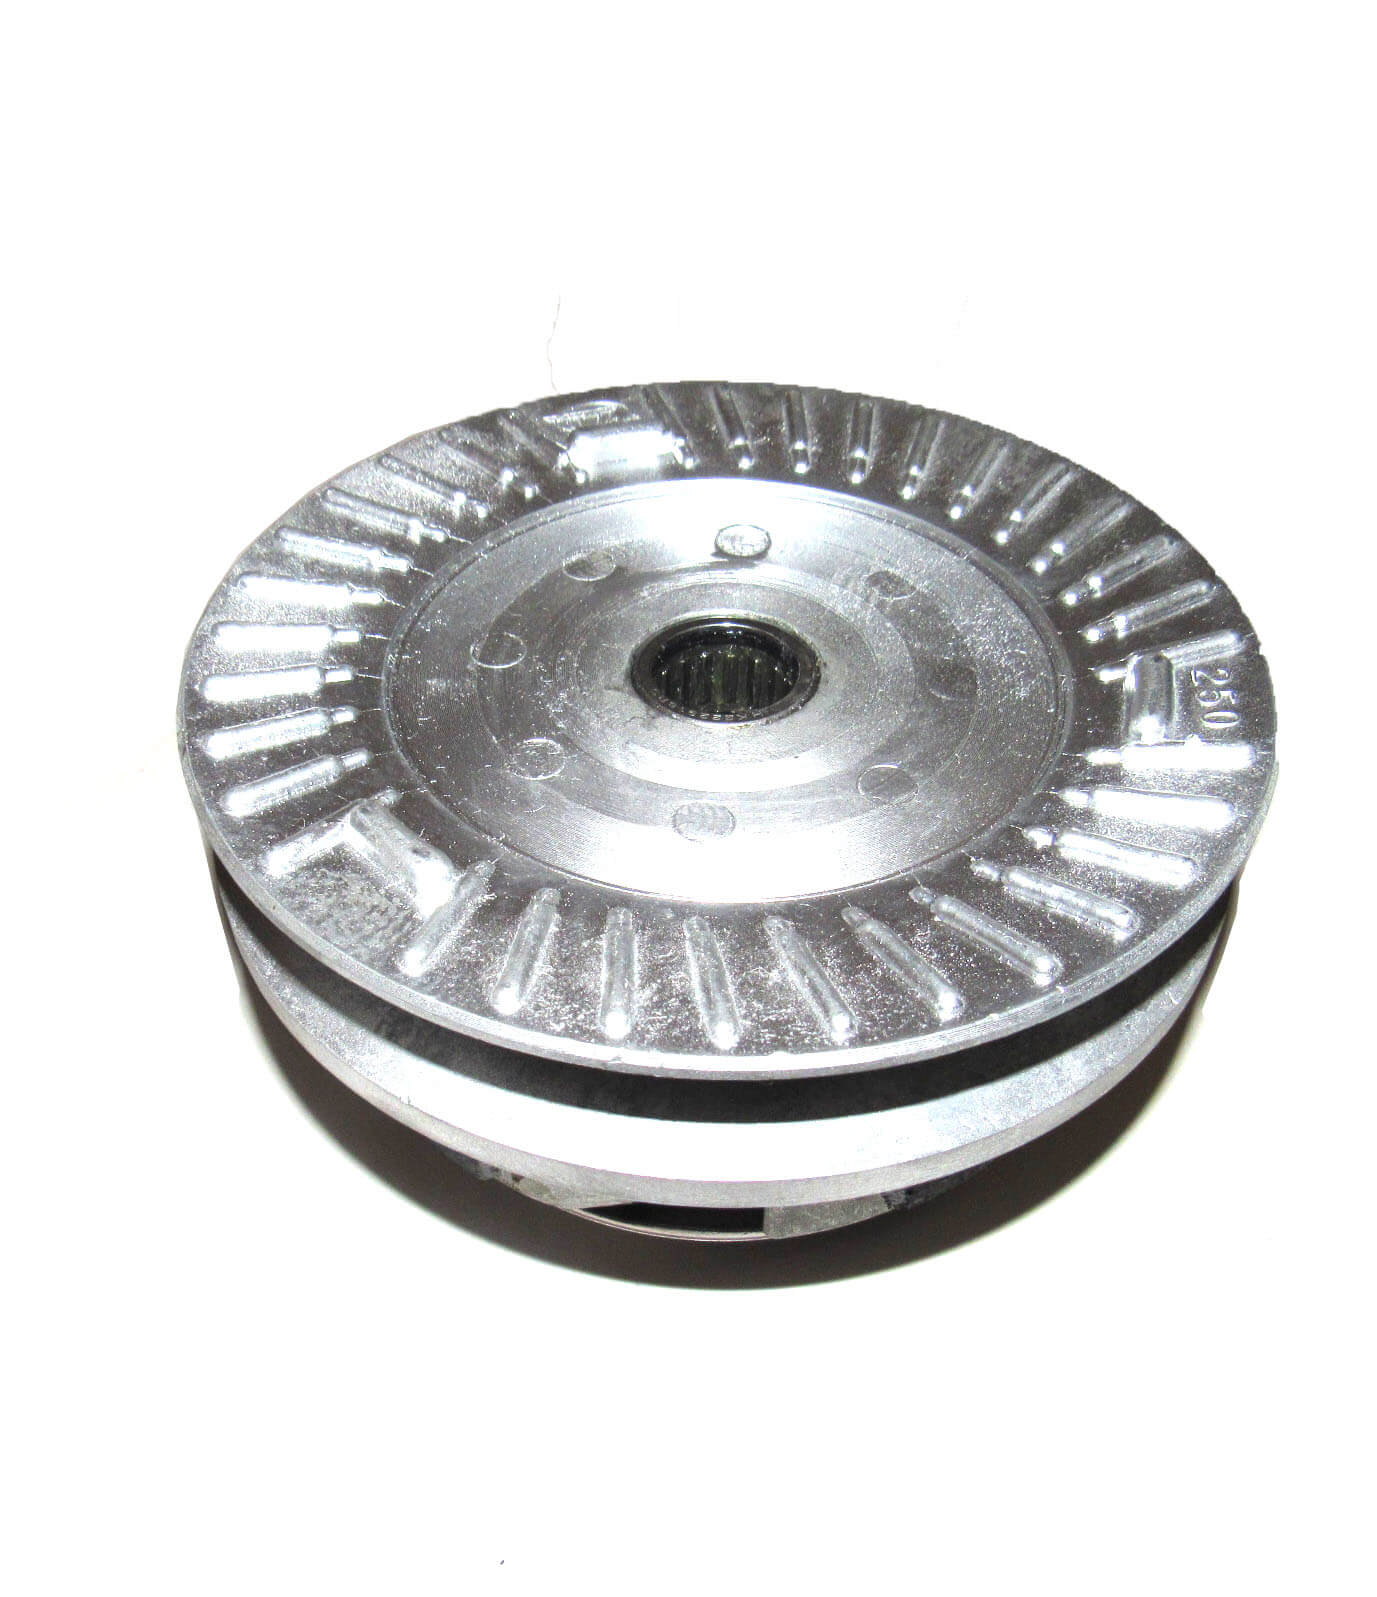 Rear Drive Clutch-Driven Pulley Fits Most 250-300cc GY6 Chinese ATVs, GoKarts, Scooters, UTVs Bell ID=135 Shaft=15 Splines=19